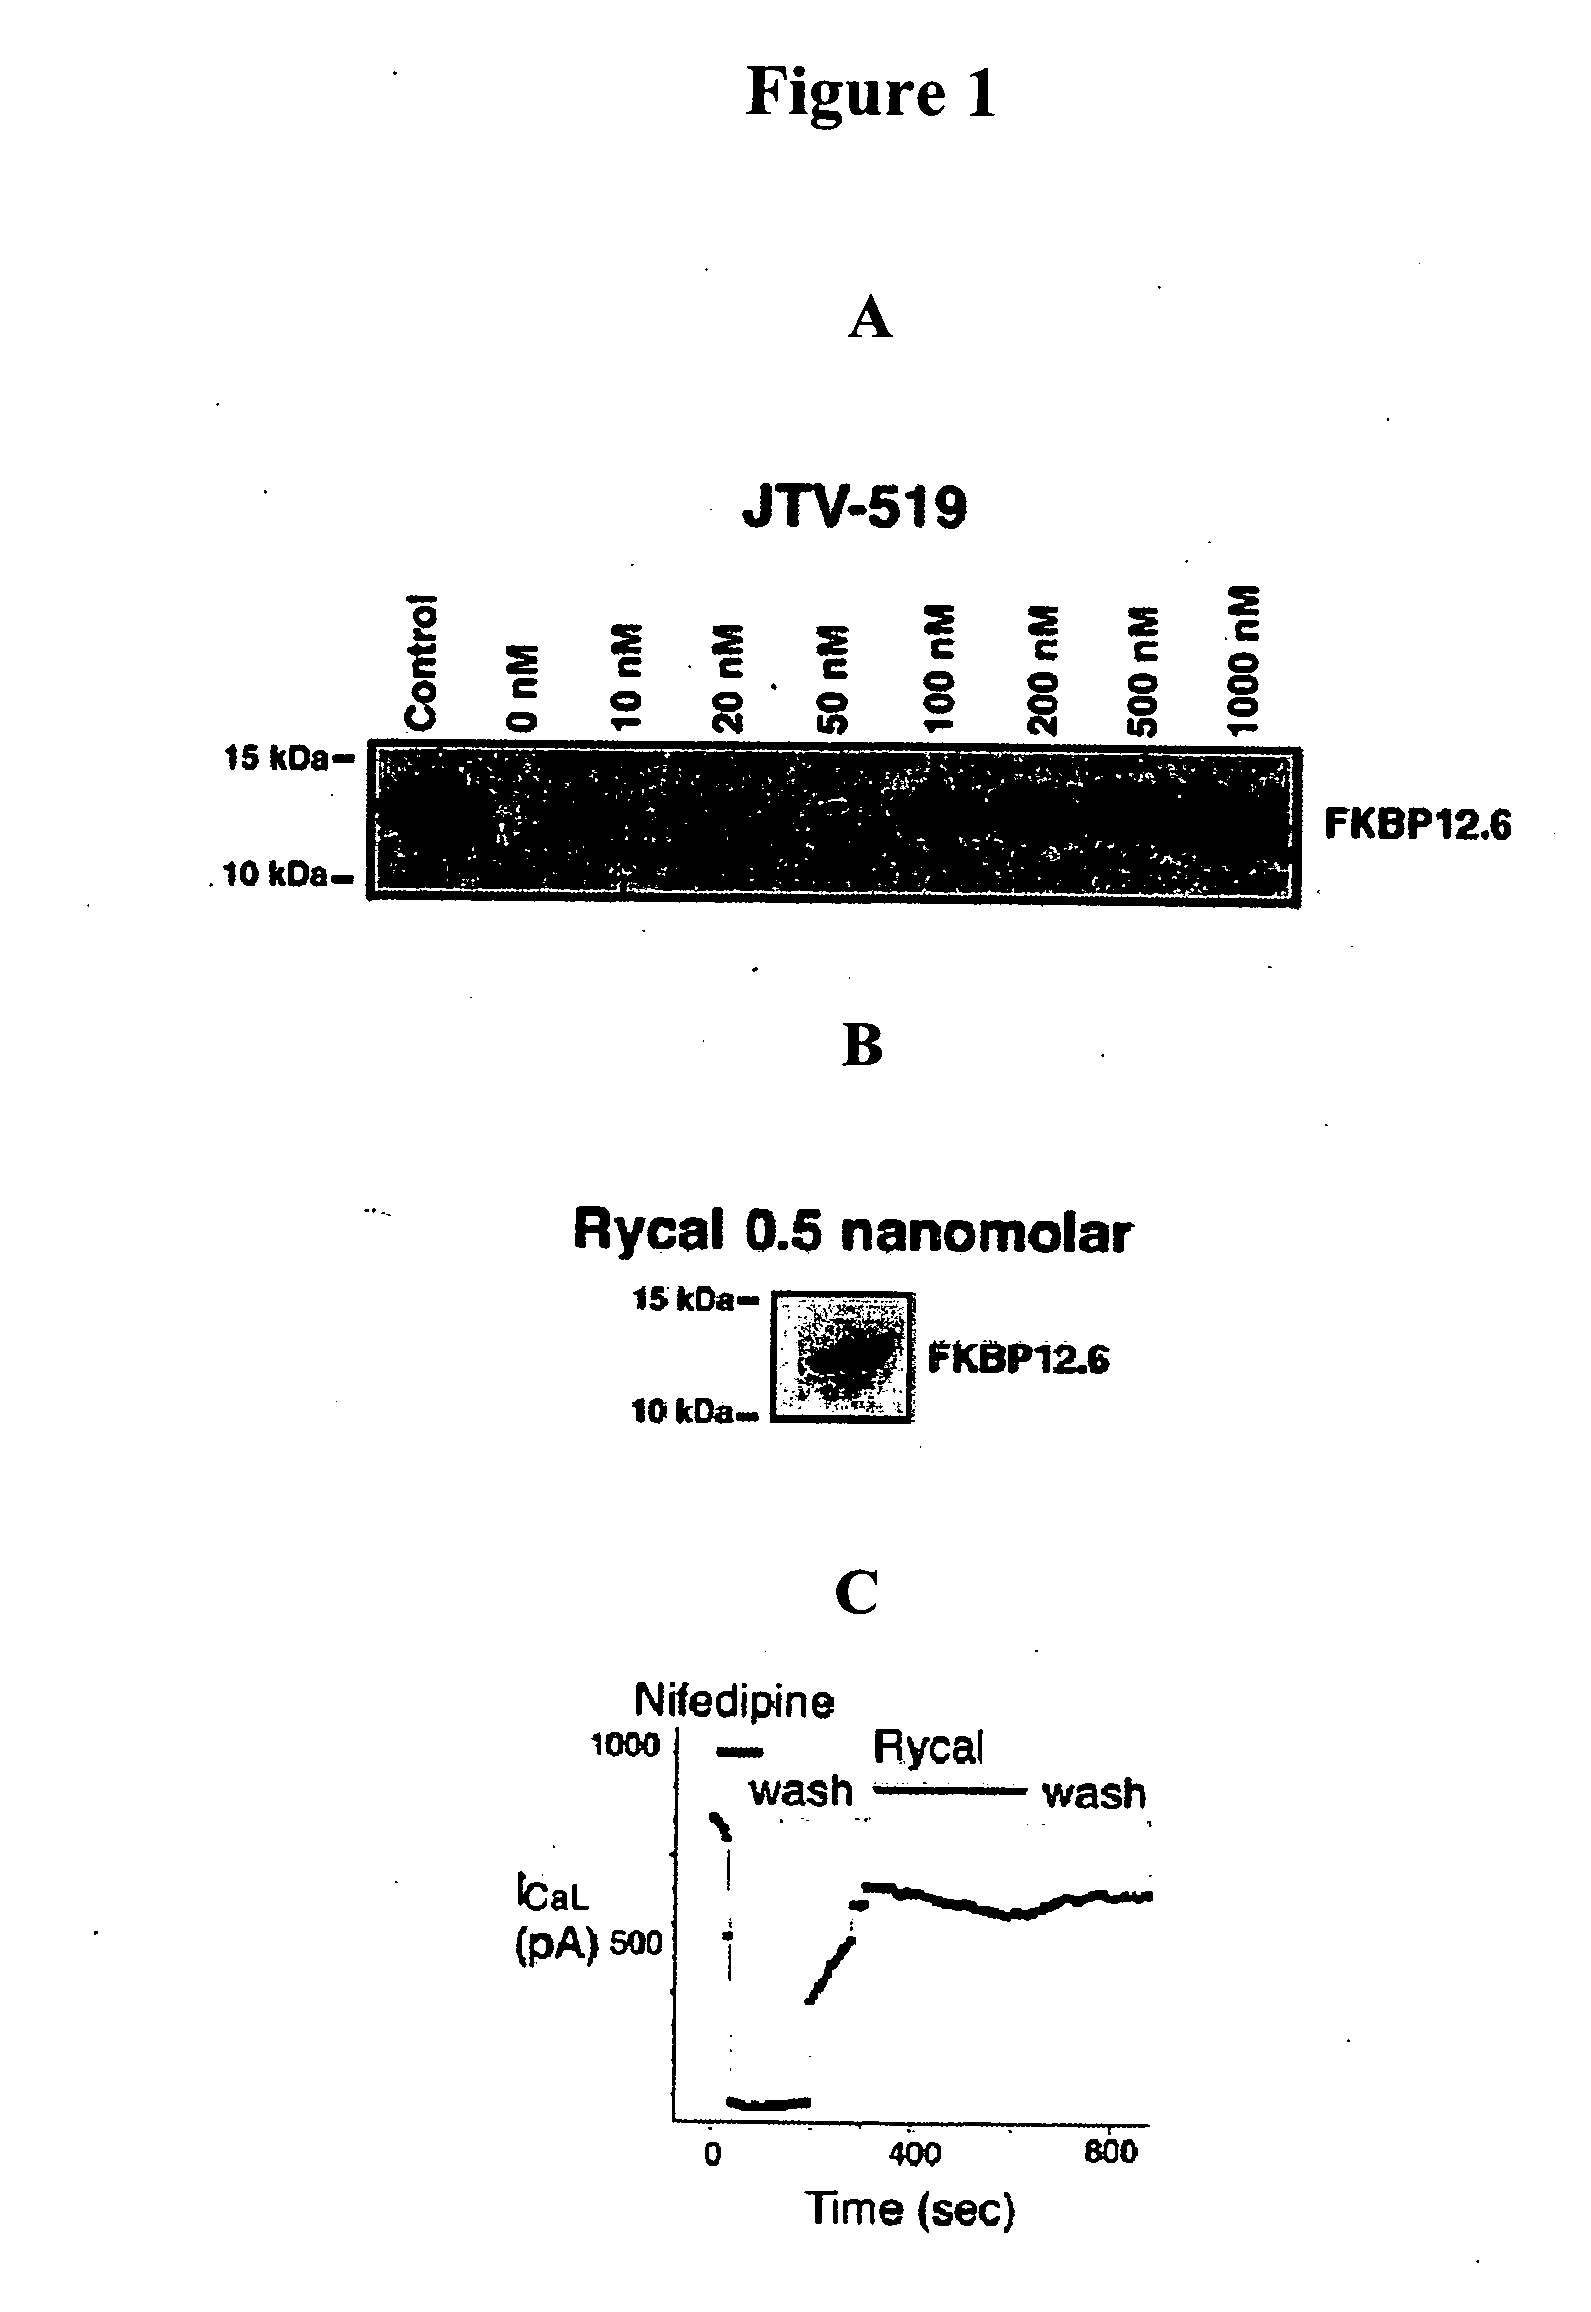 Novel agents for preventing and treating disorders involving modulation of the RyR receptors